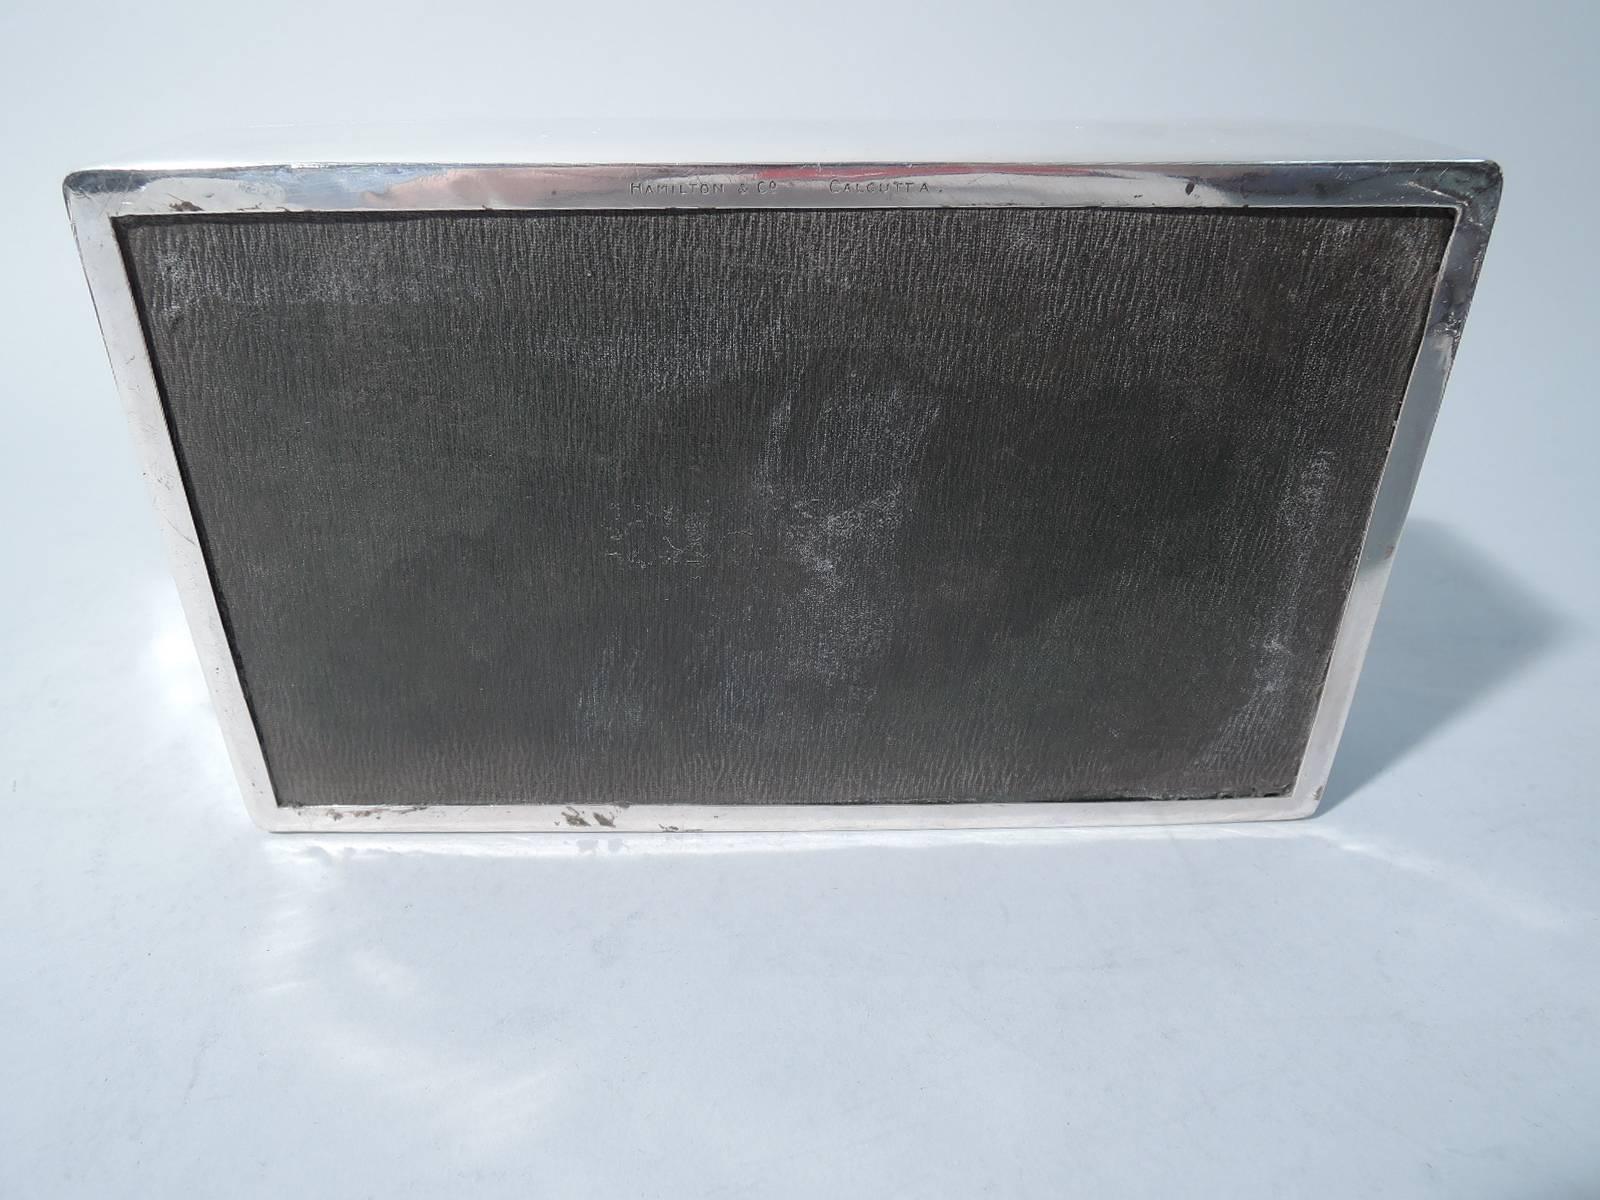 Modern Smart Sterling Silver Desk Box  - Made in England, Retailed in India